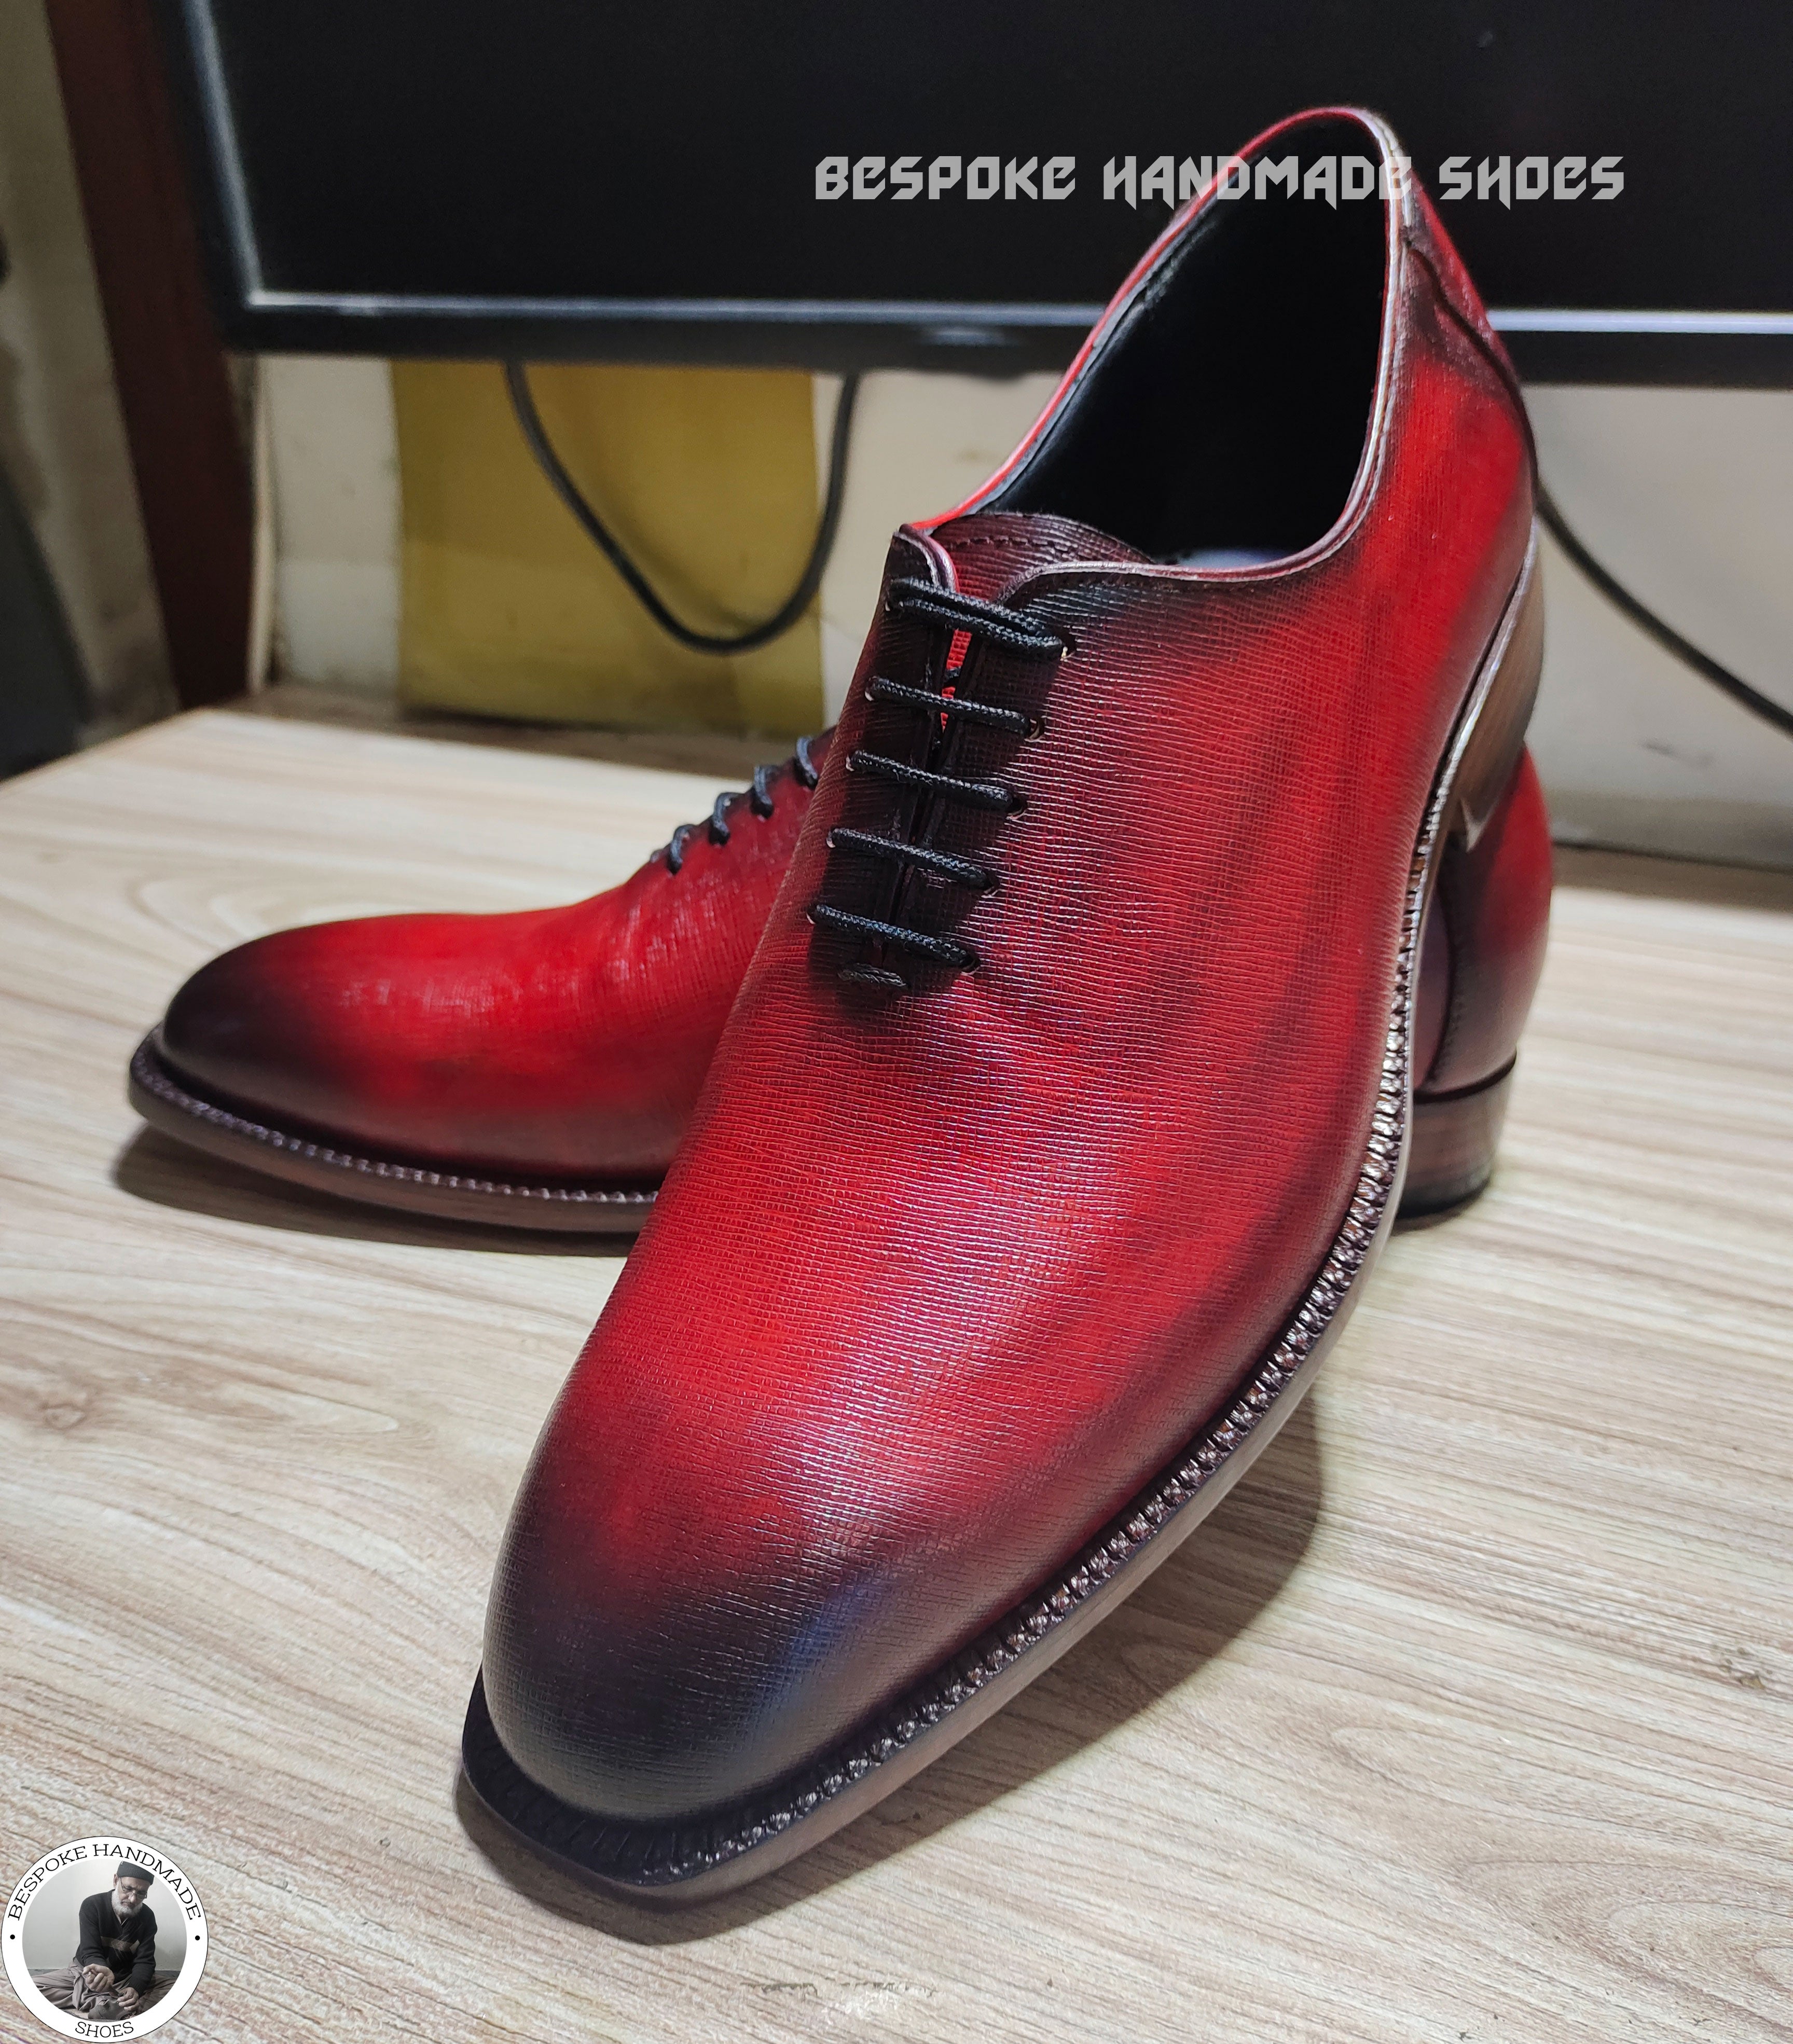 Men's Handmade Shoes, Hand Painted Red Leather Black Shaded Lace up Oxford Dress Shoes